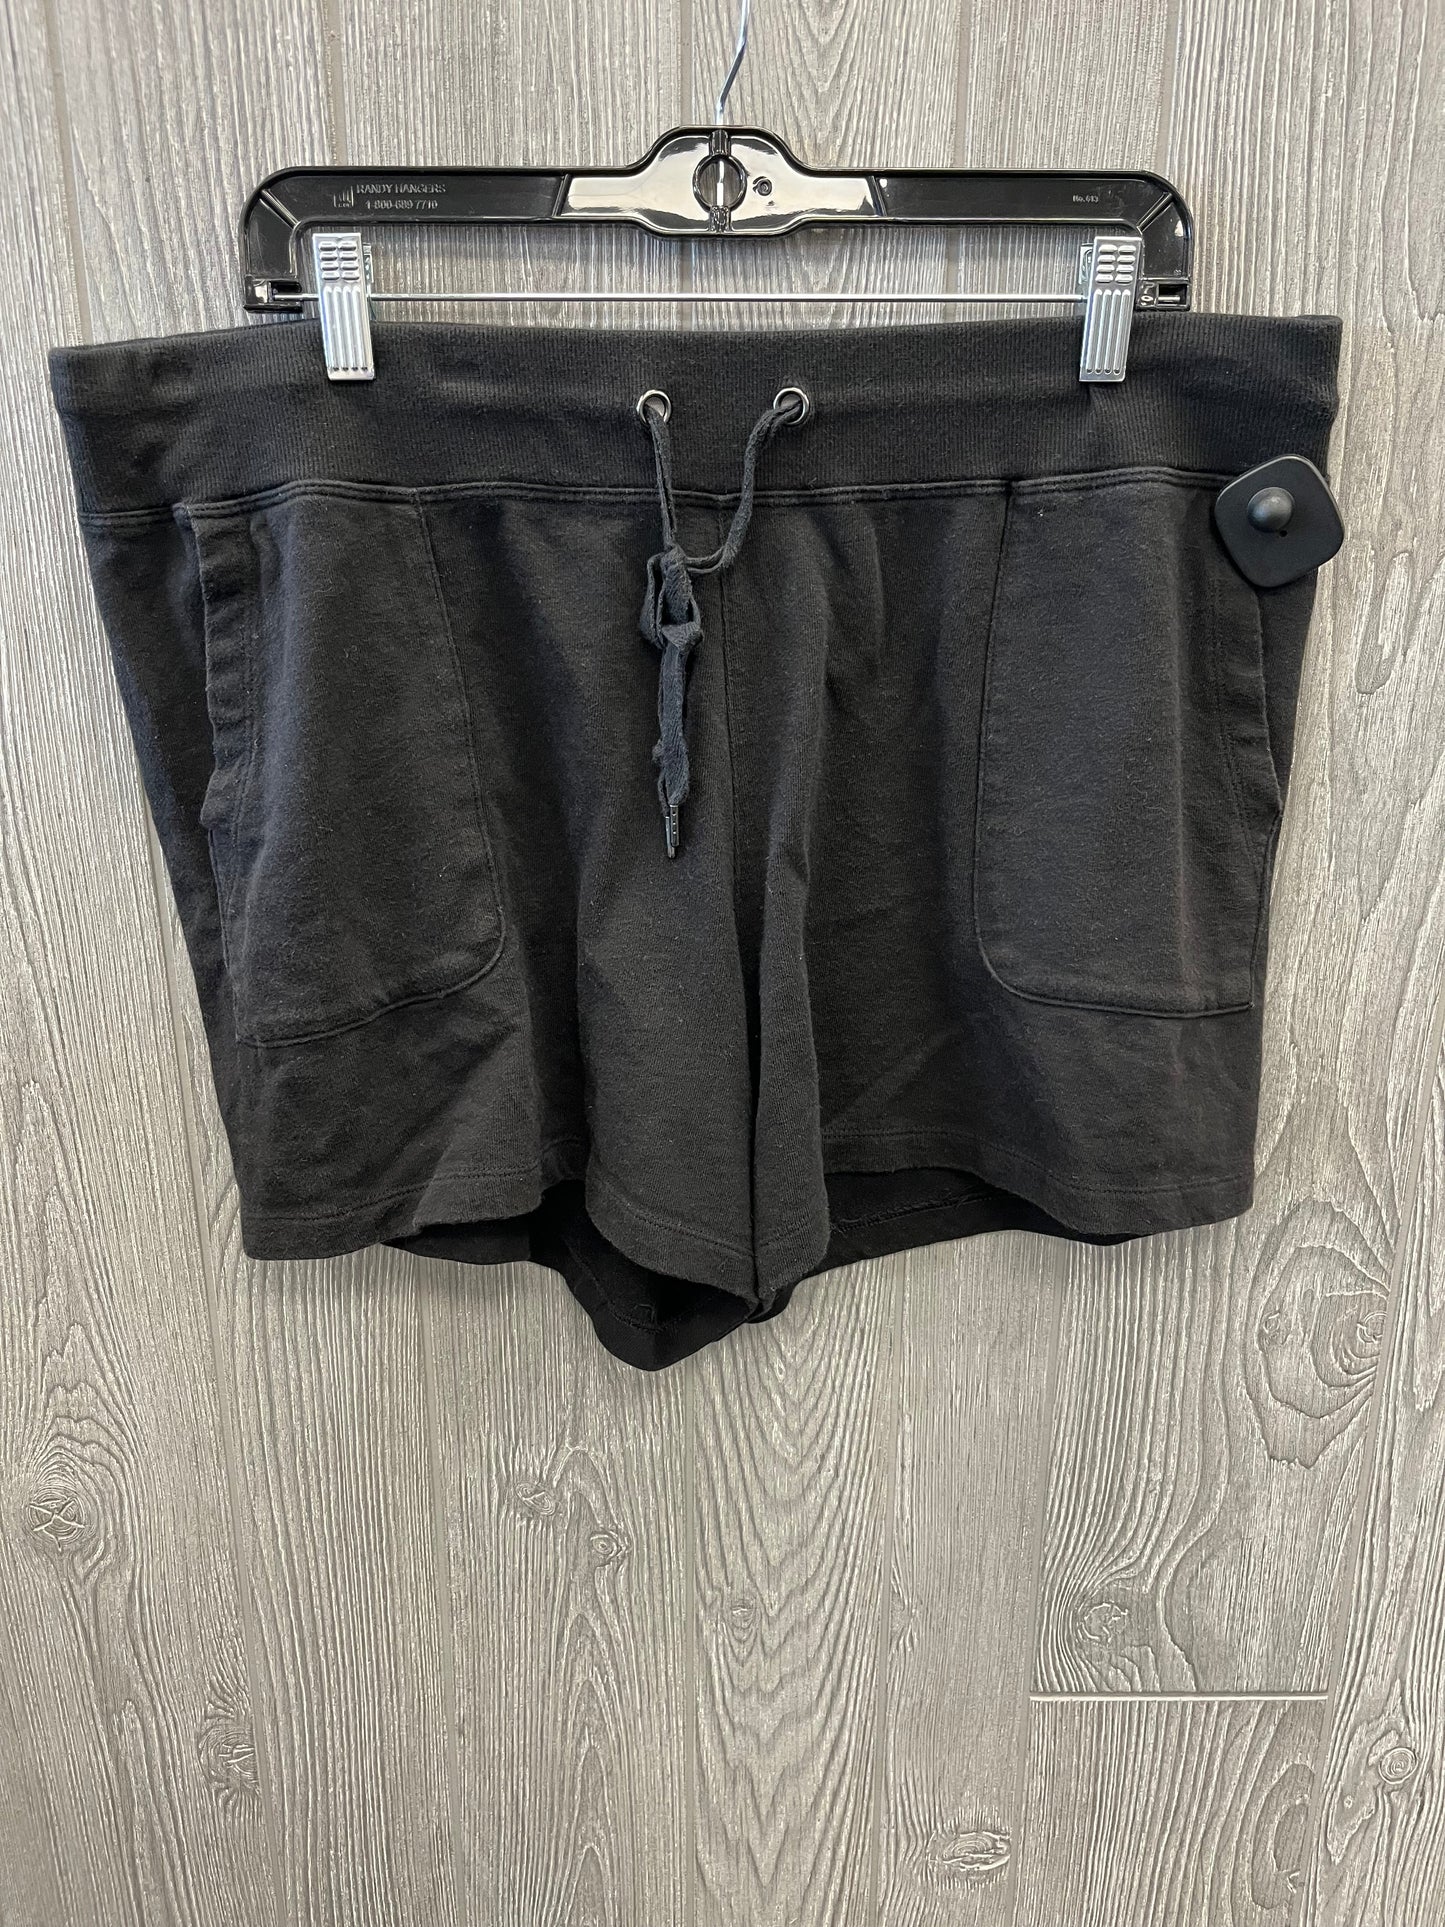 Athletic Shorts By Terra & Sky  Size: 1x